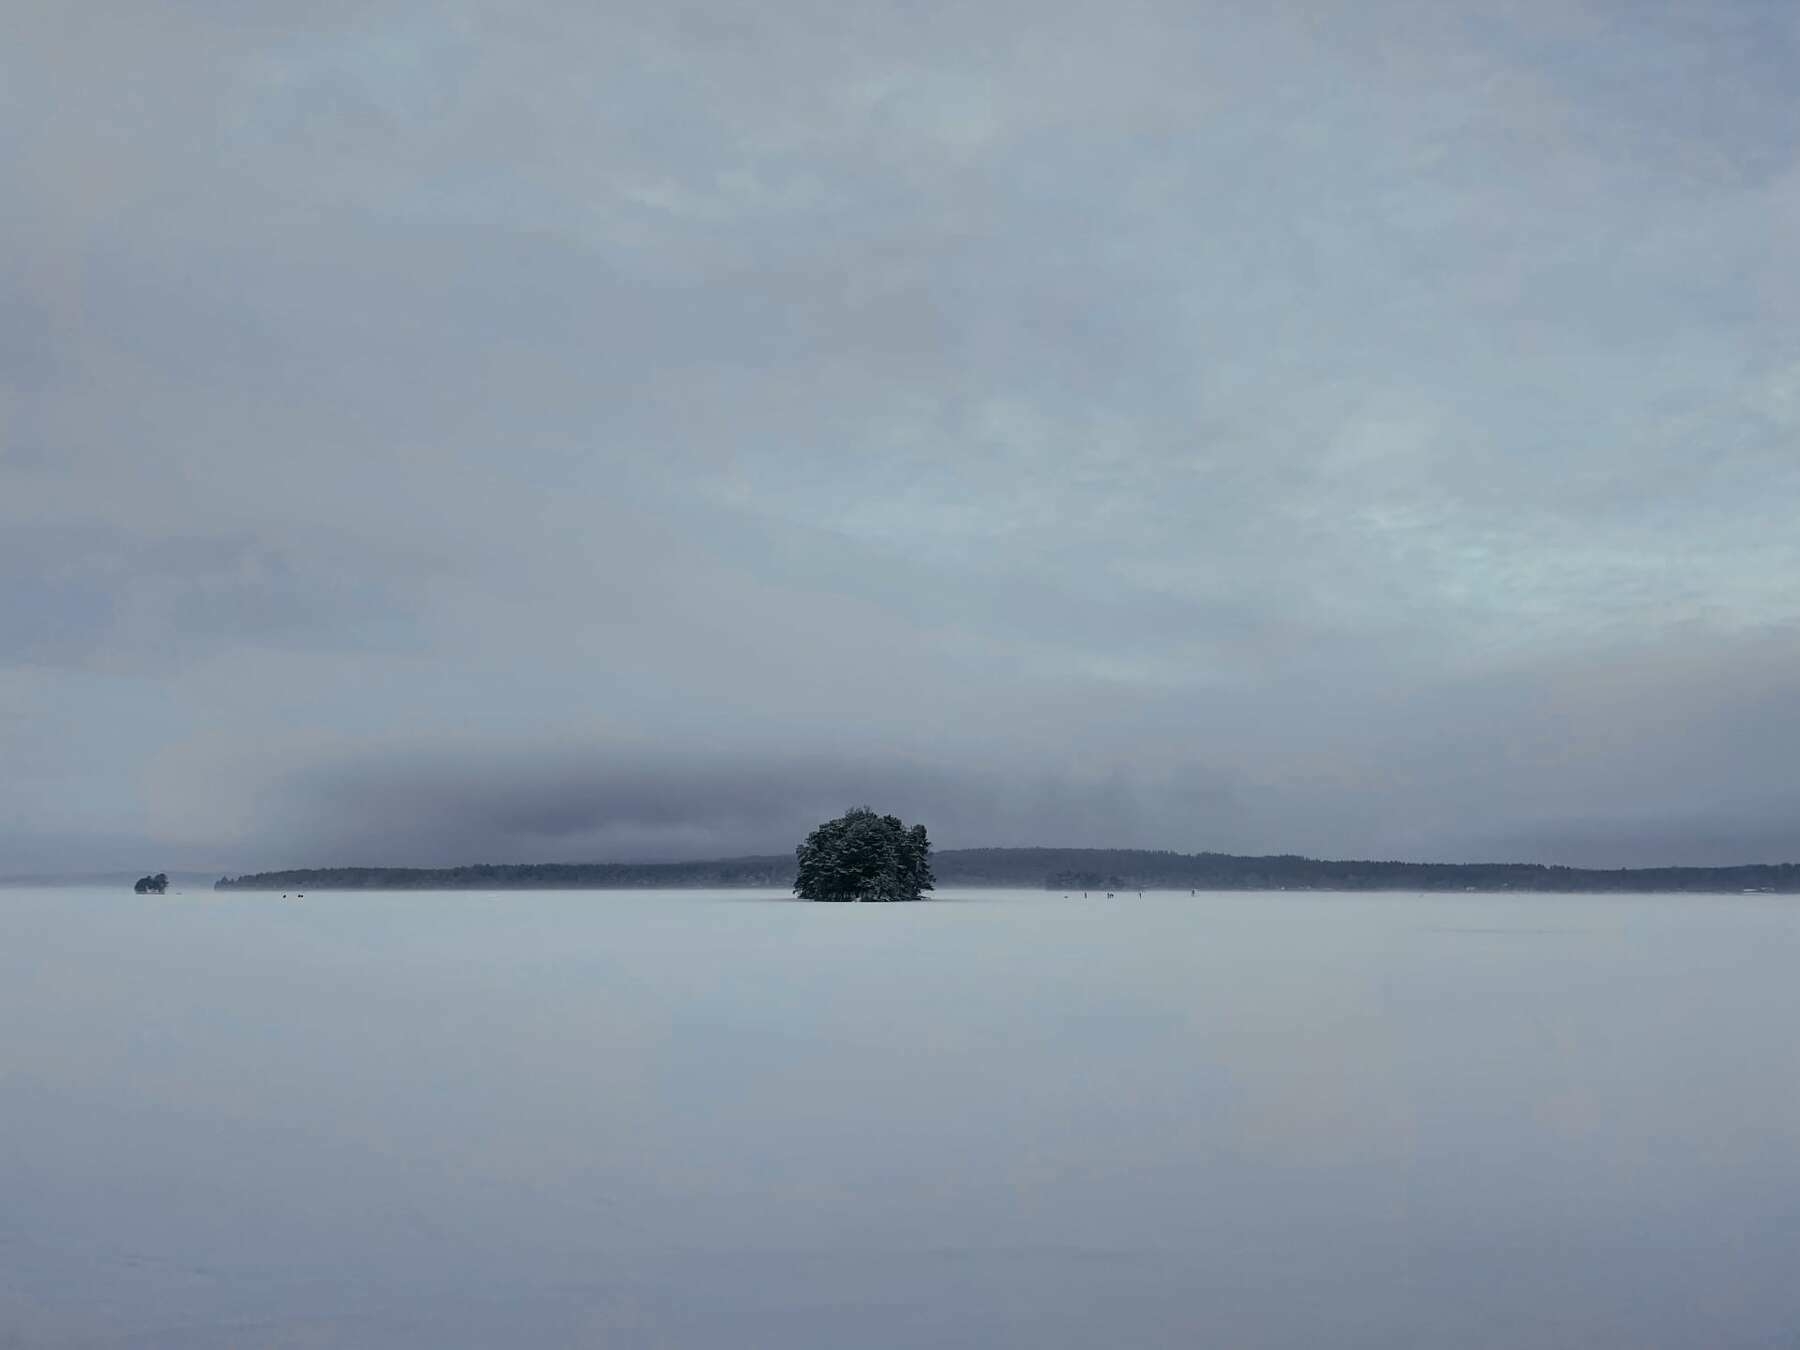 A frozen lake and overcast sky. Tiny looking humans can be spotted in the far distance.